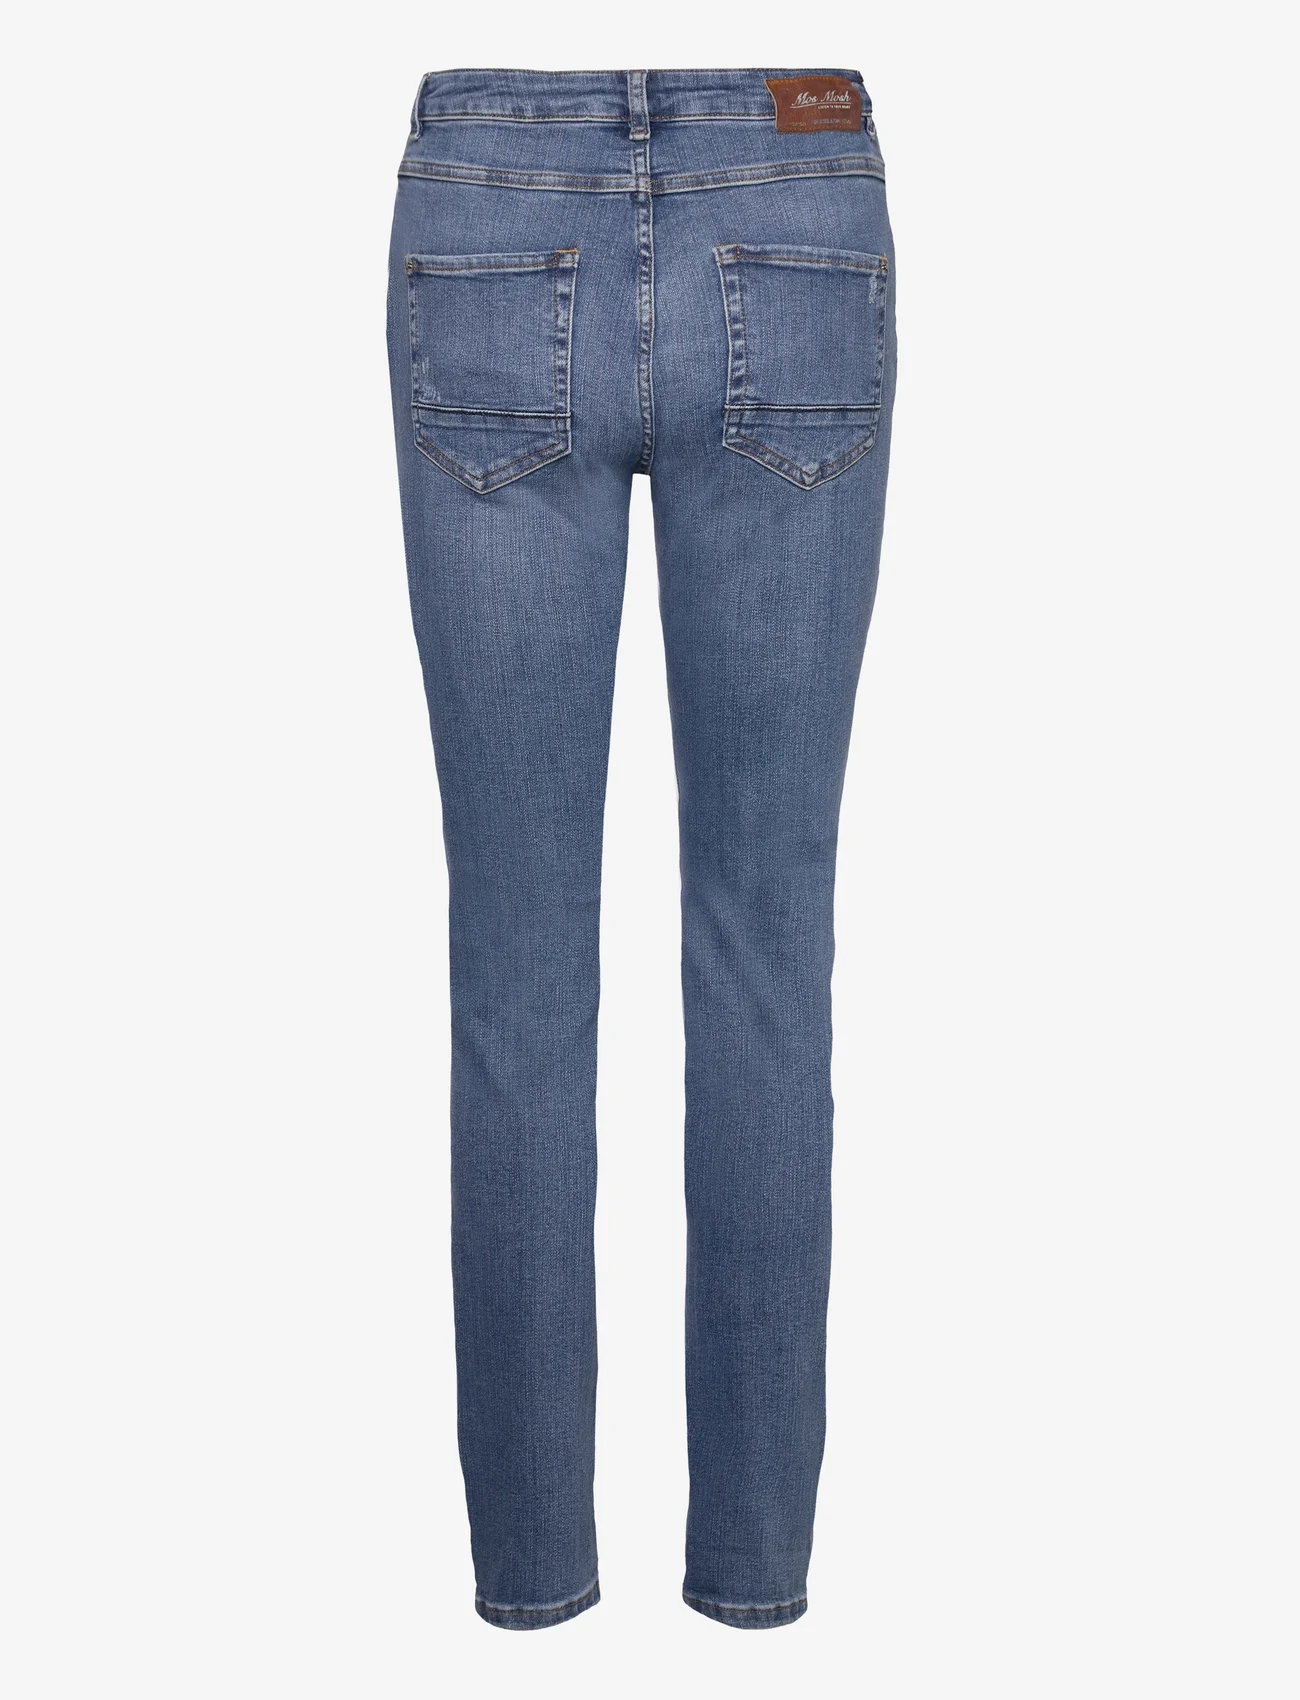 MOS MOSH - MMBradford Pingel Jeans - tapered jeans - blue - 1